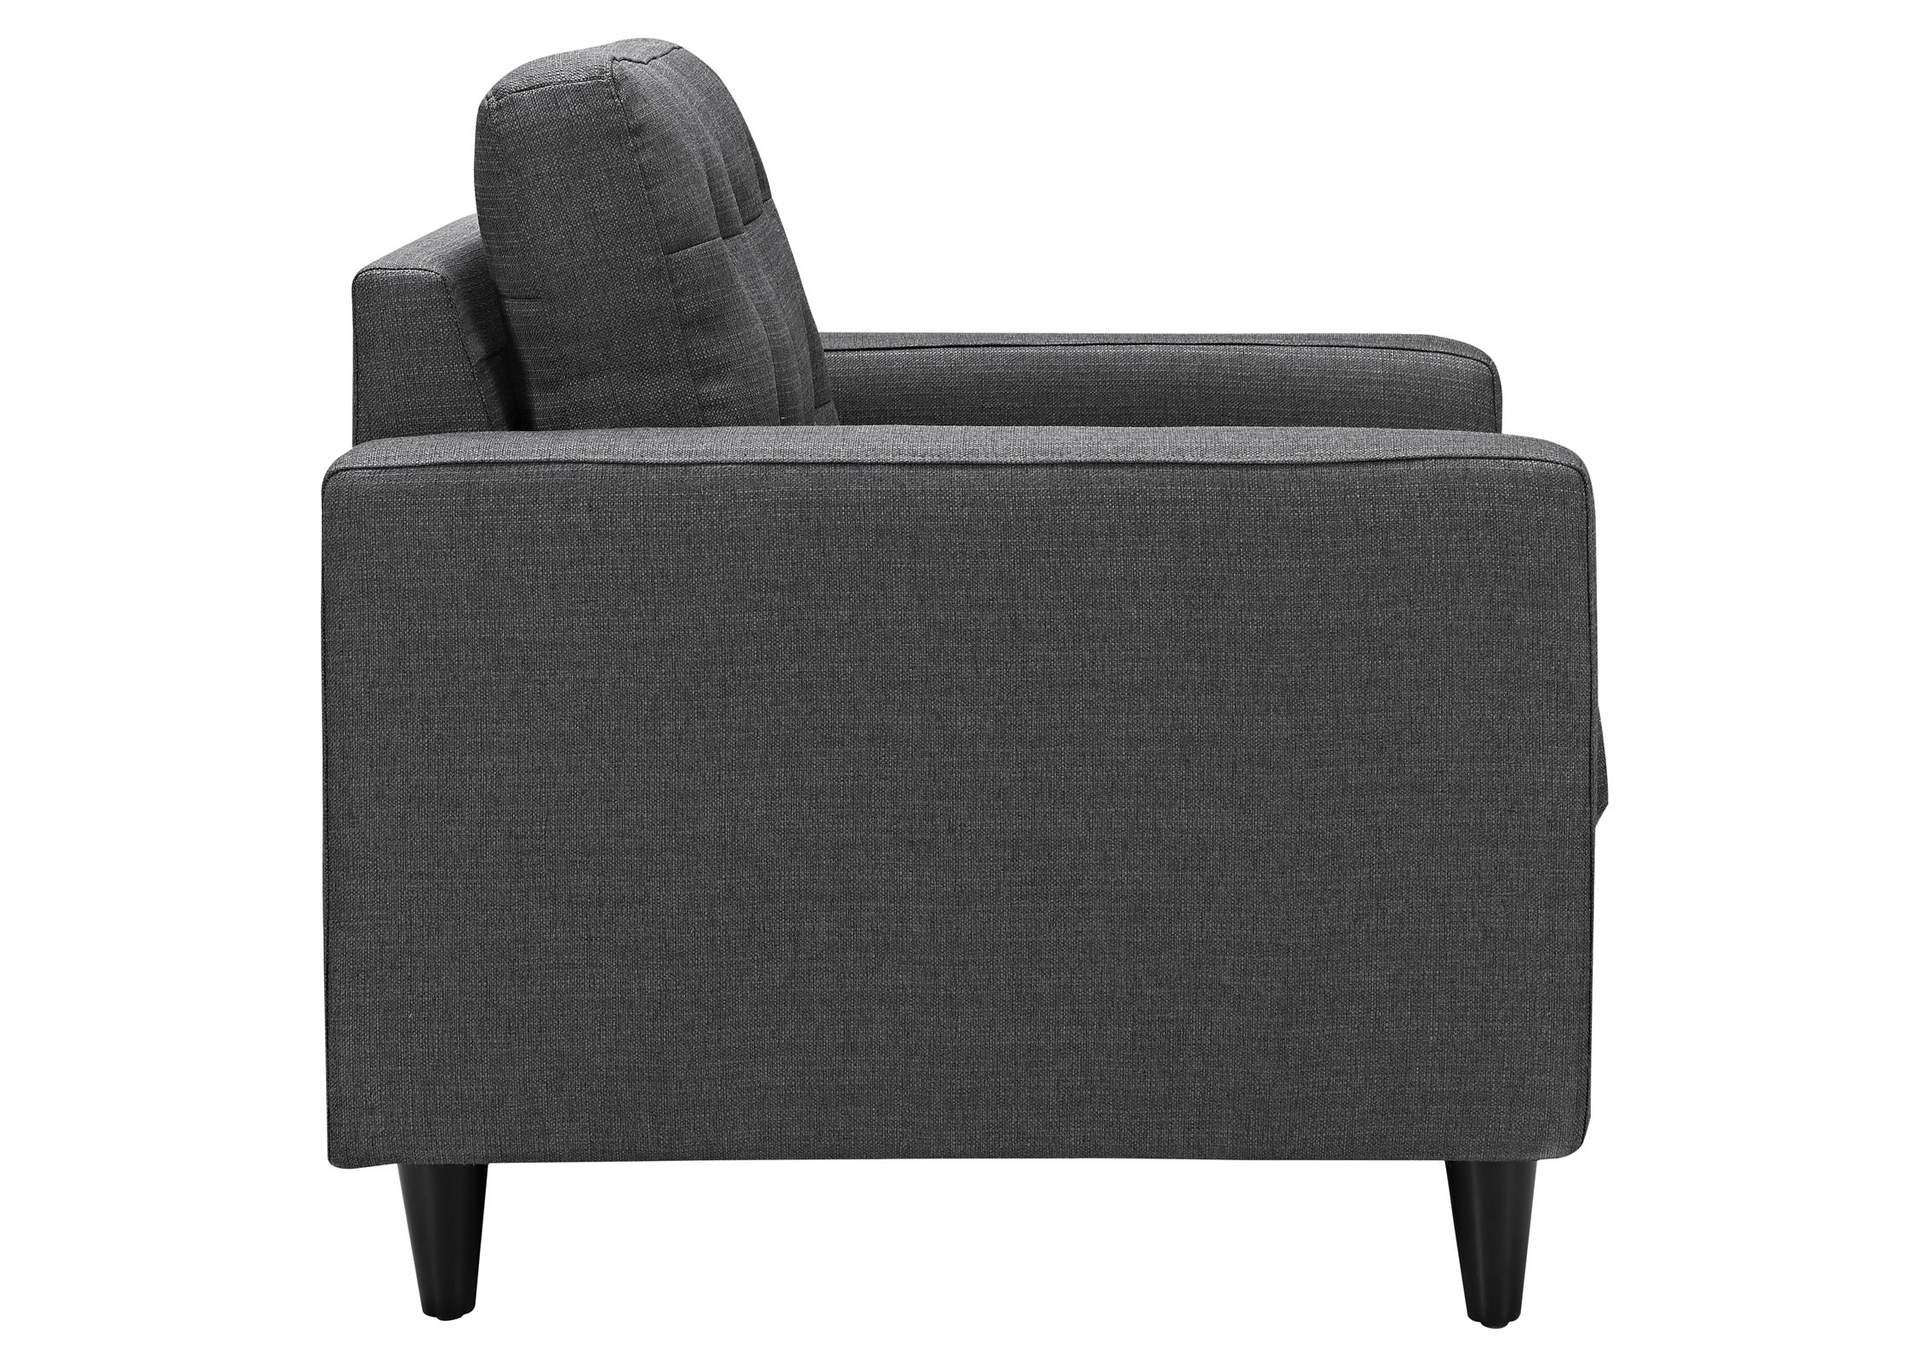 Gray Empress Upholstered Fabric Arm Chair,Modway